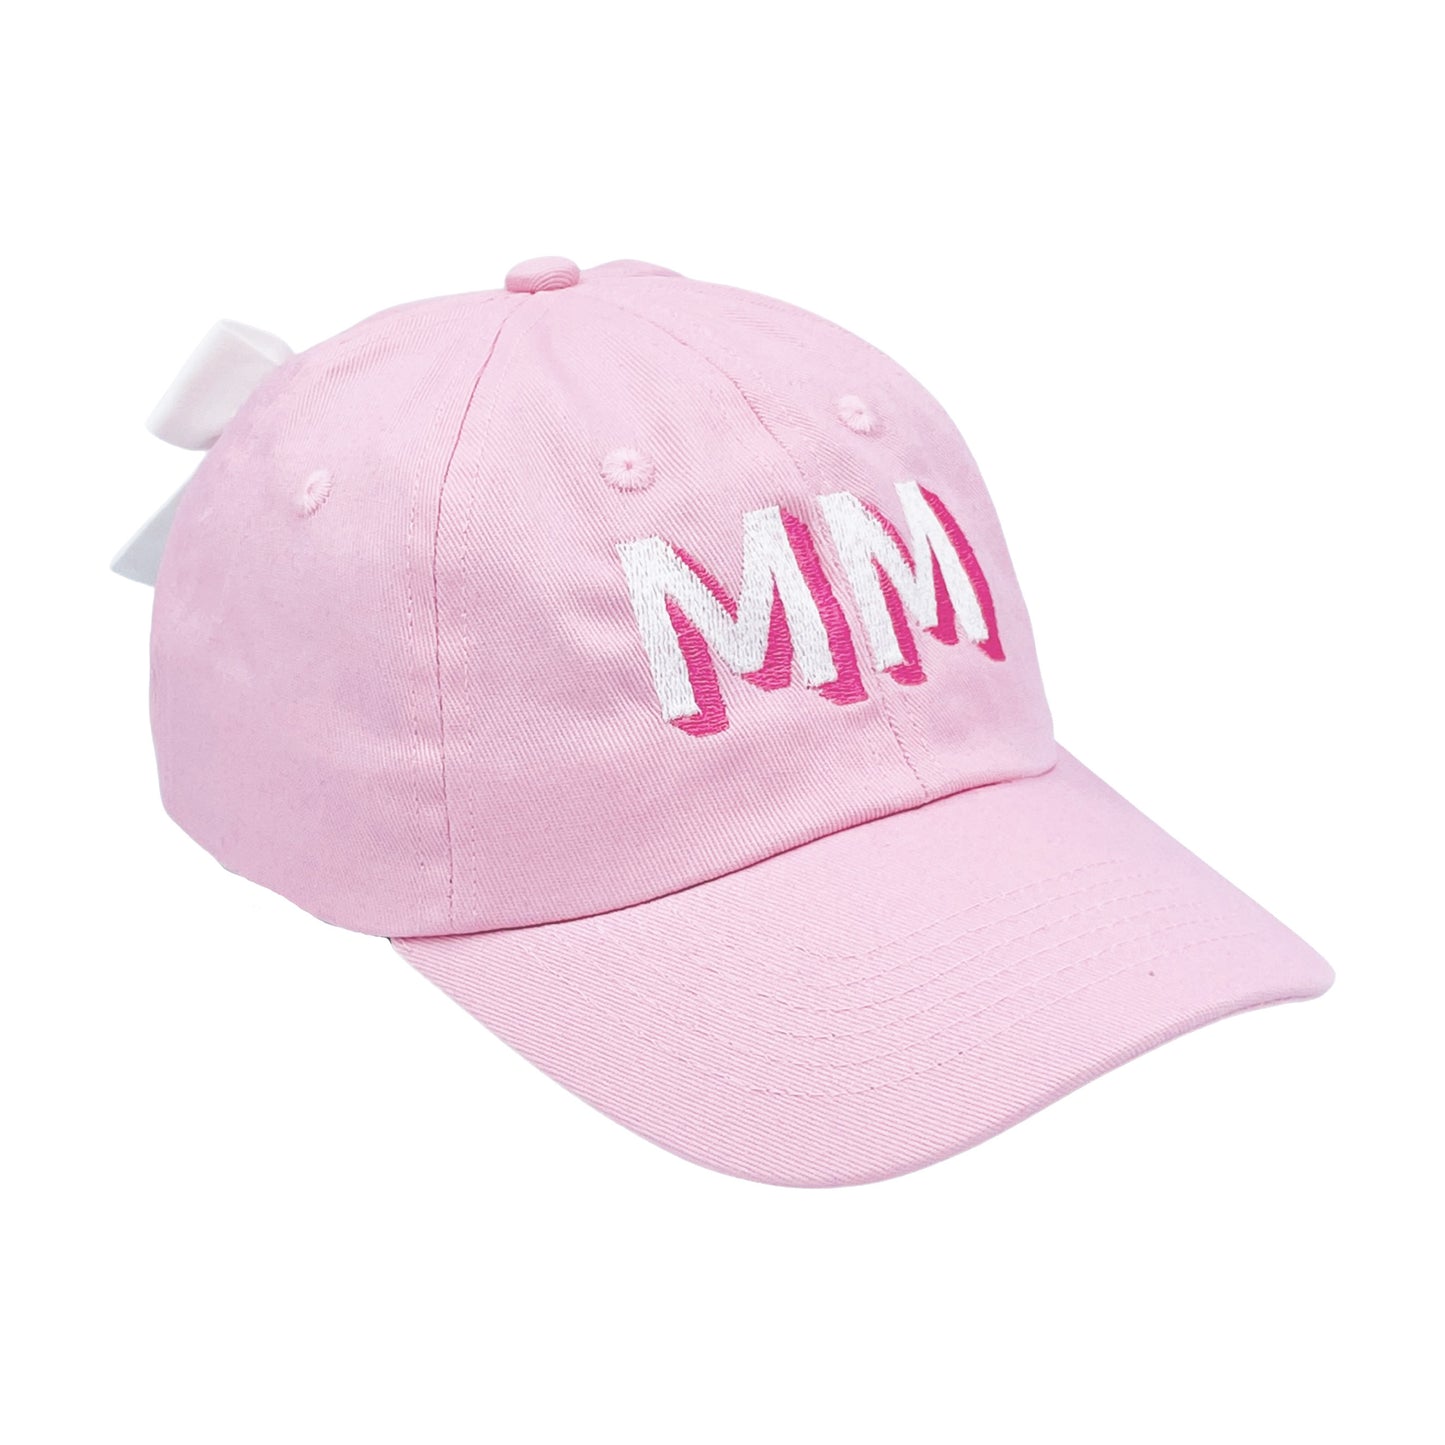 Customizable Bow Baseball Hat in Palmer Pink (Baby)